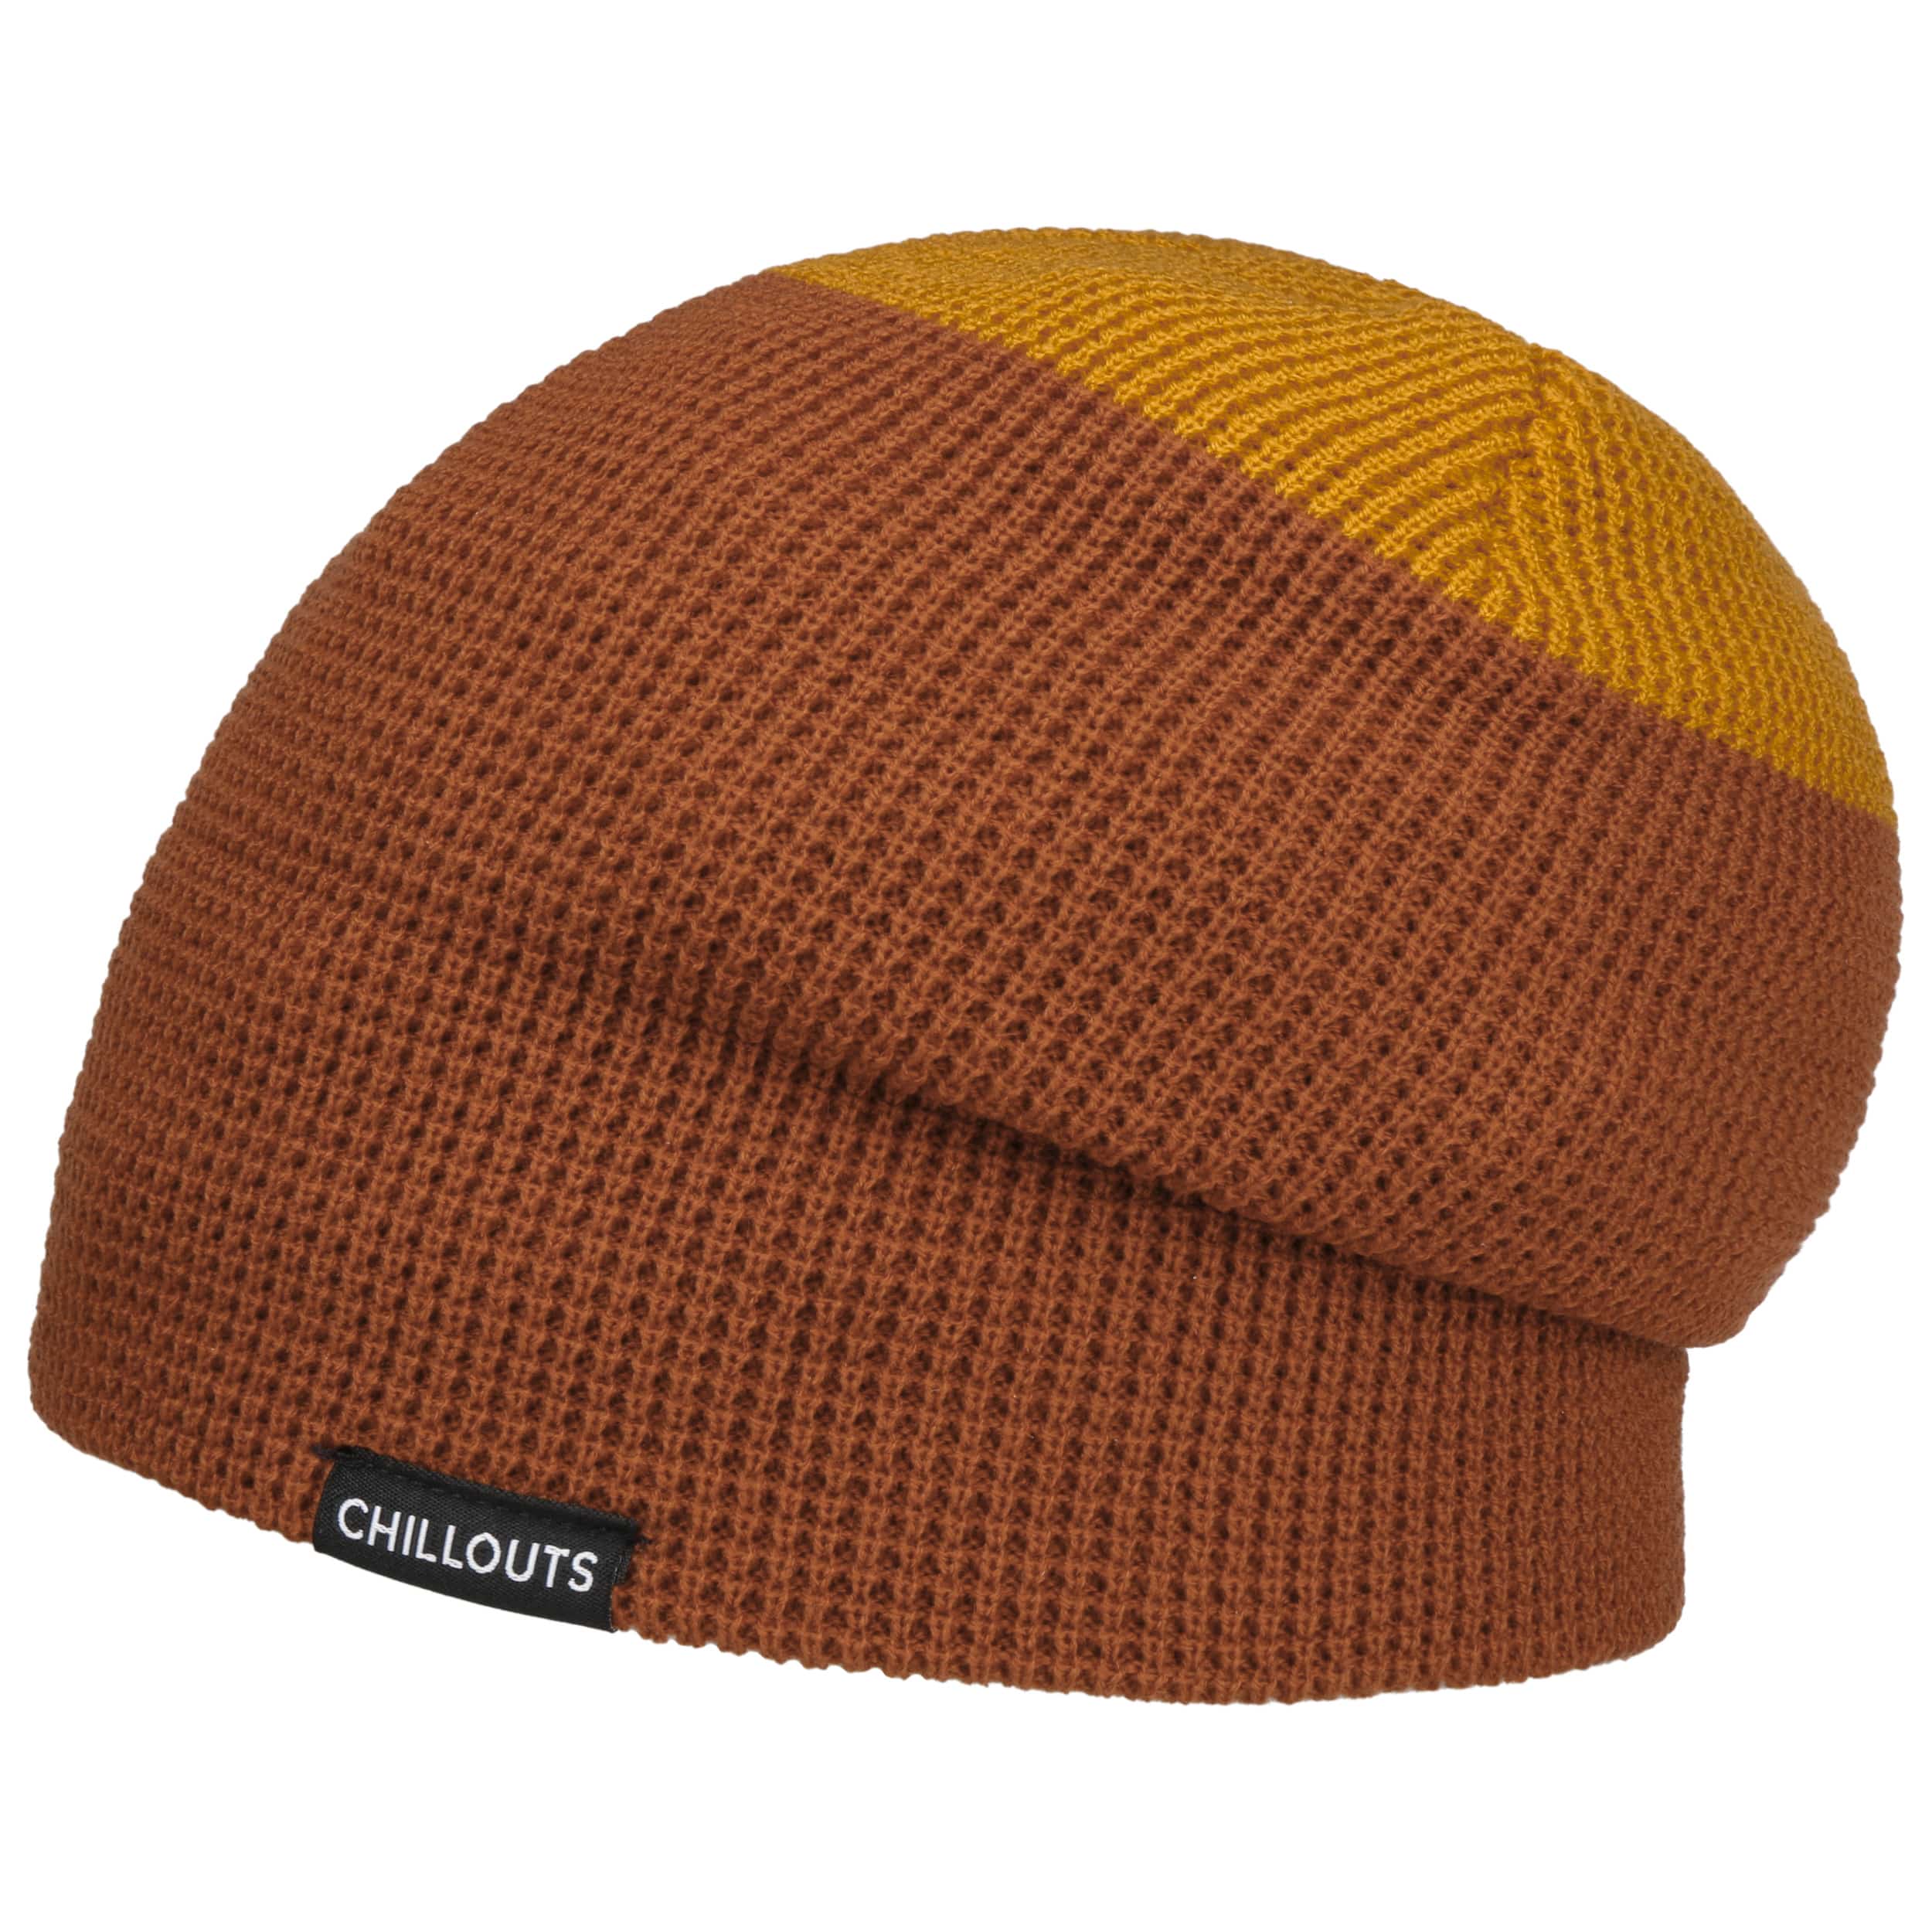 Malou Twotone Beanie by Chillouts - 19,99 €